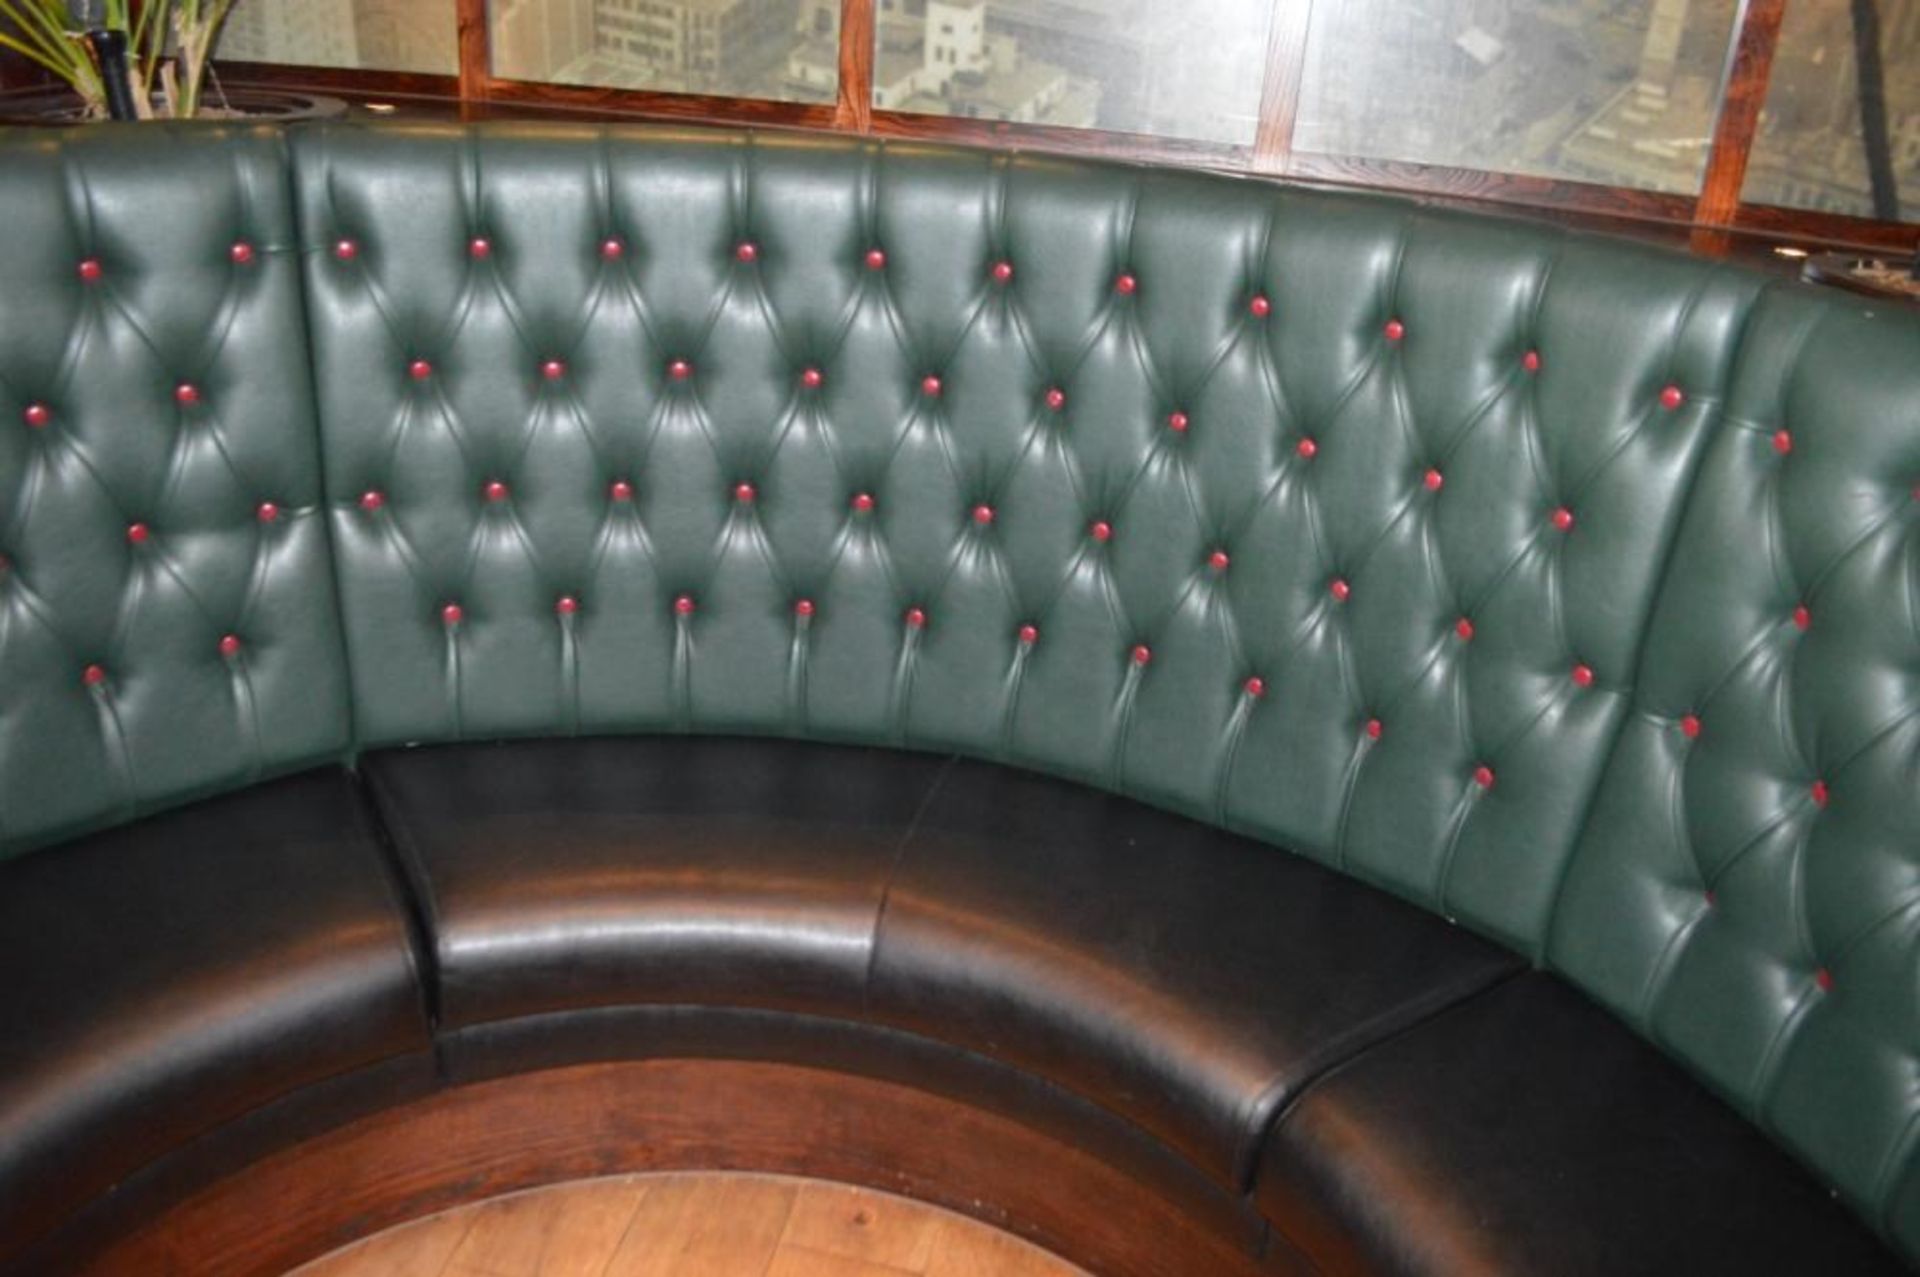 1 x Contemporary U Shape Seating Booth - Features a Leather Upholstery With Green Studded Backrests, - Image 8 of 10